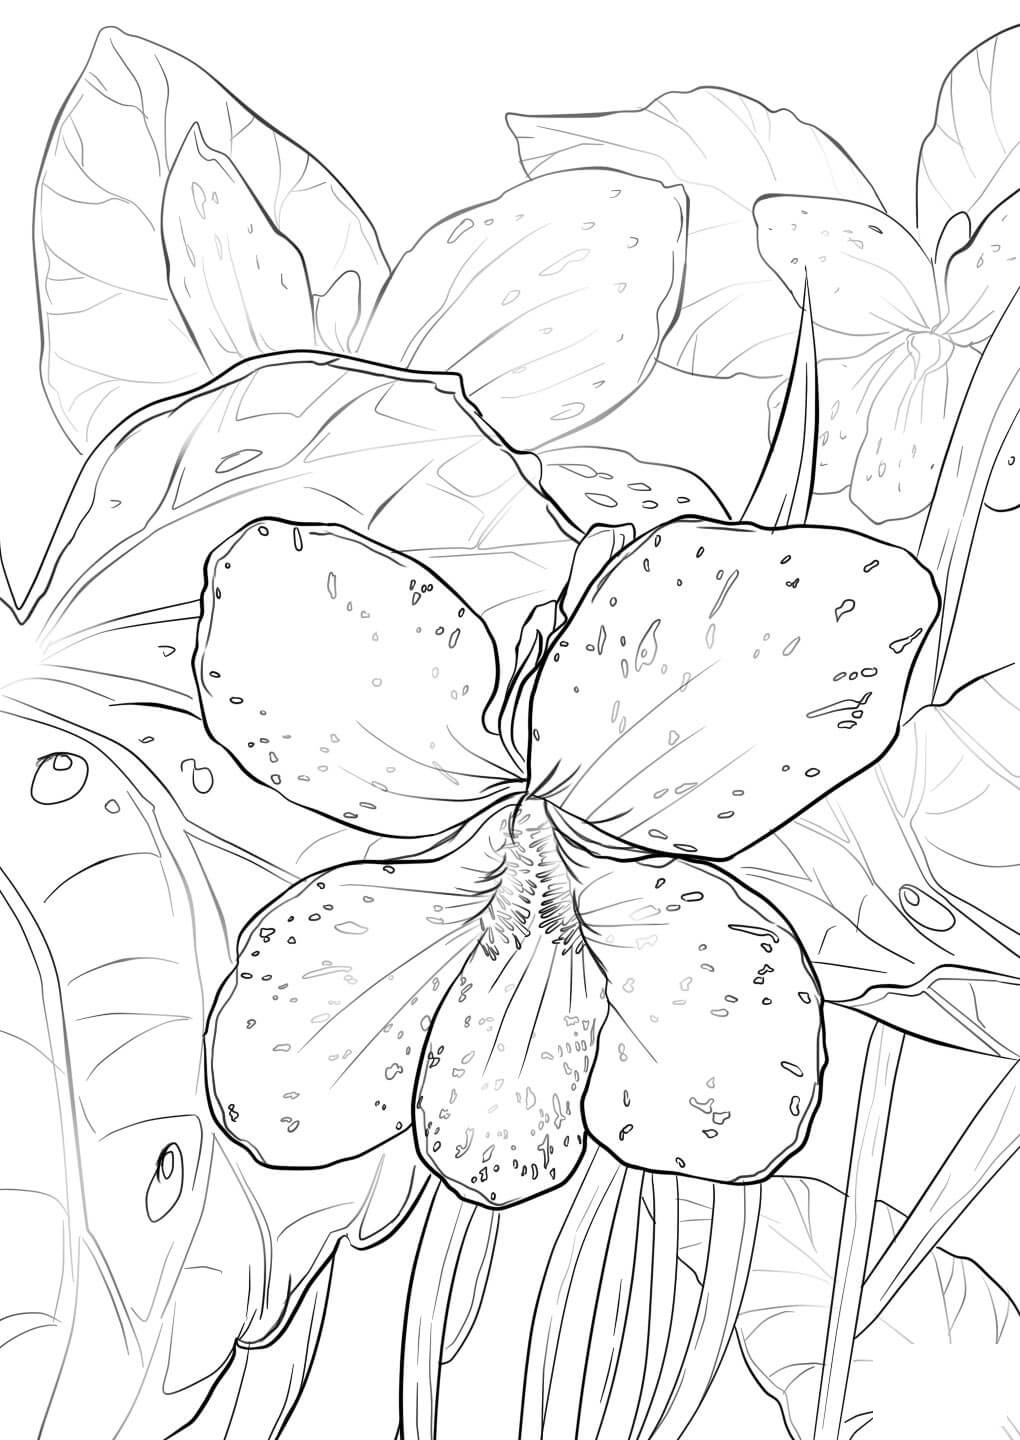 blue-violet-coloring-page - Nature Coloring Pages